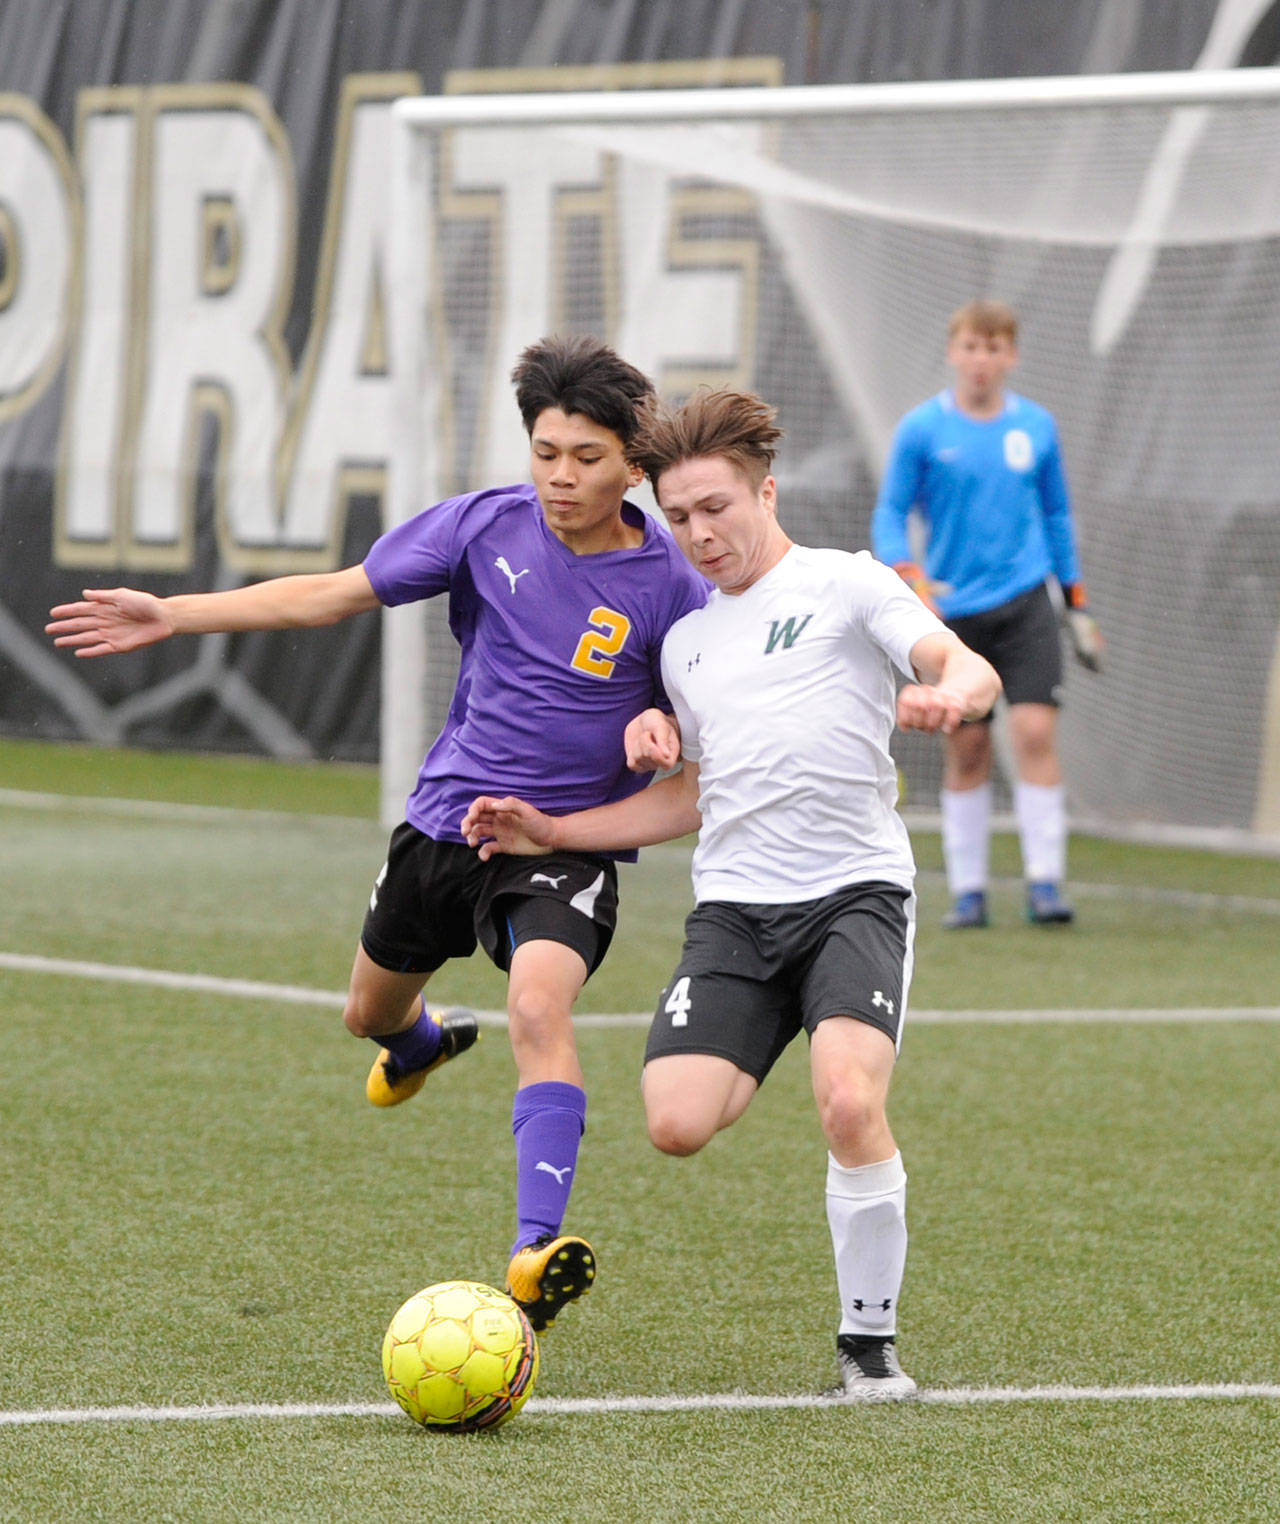 Sequim’s Kristian Mingoy, left, vies for possession with Woodland’s J.J. Fuerst in the first half of Sequim’s 3-2 state 2A tourney playoff loss on May 15. Sequim Gazette photo by Michael Dashiell